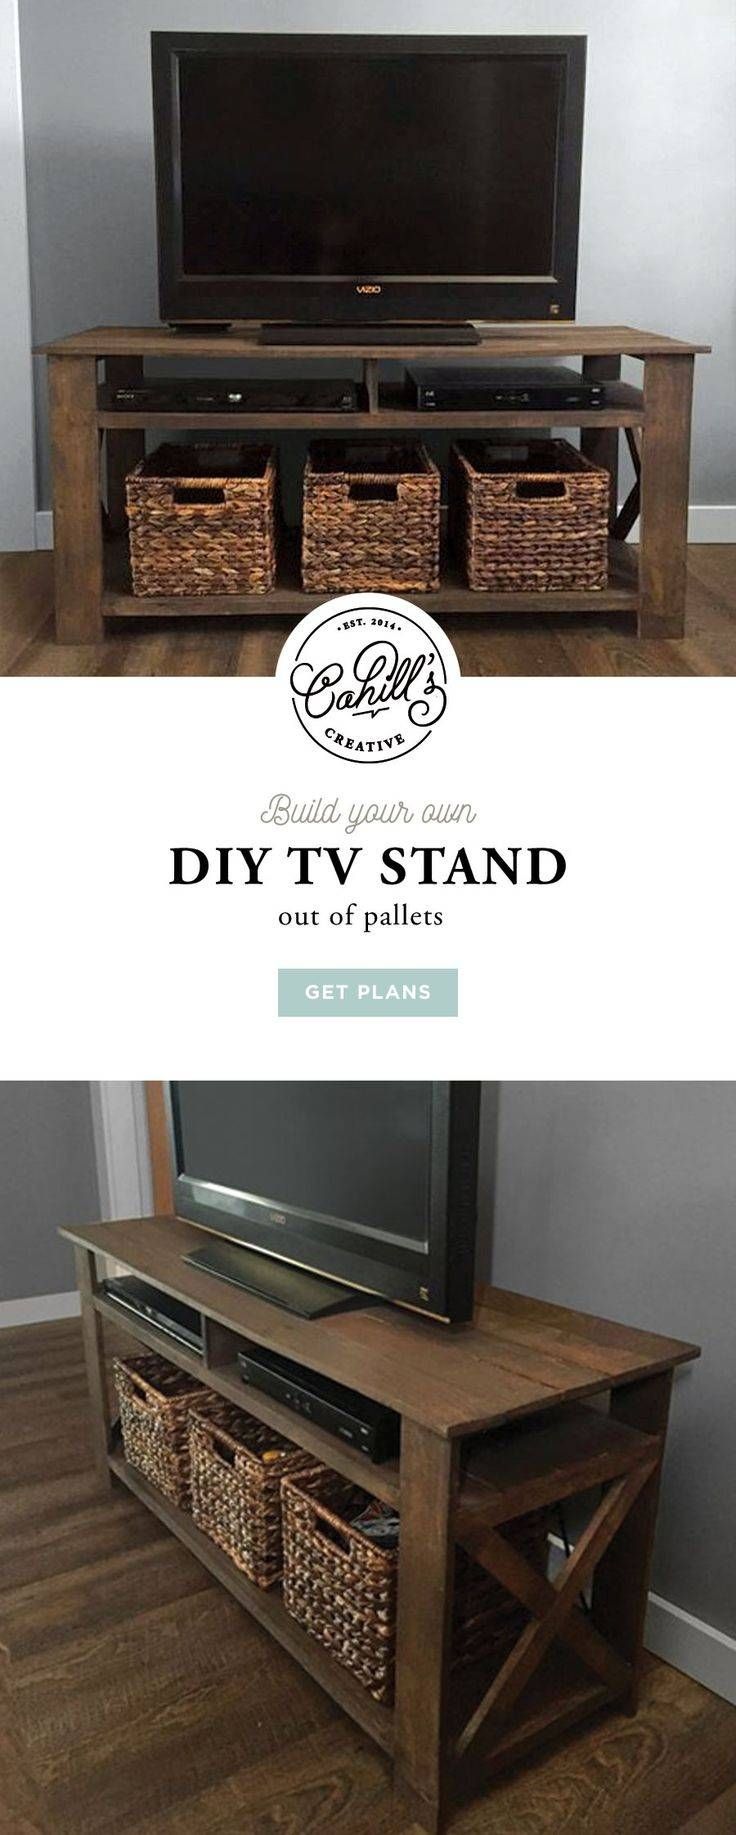 Best 25+ Antique Tv Stands Ideas On Pinterest | Chalk Paint With Regard To Rustic Tv Stands For Sale (View 8 of 15)